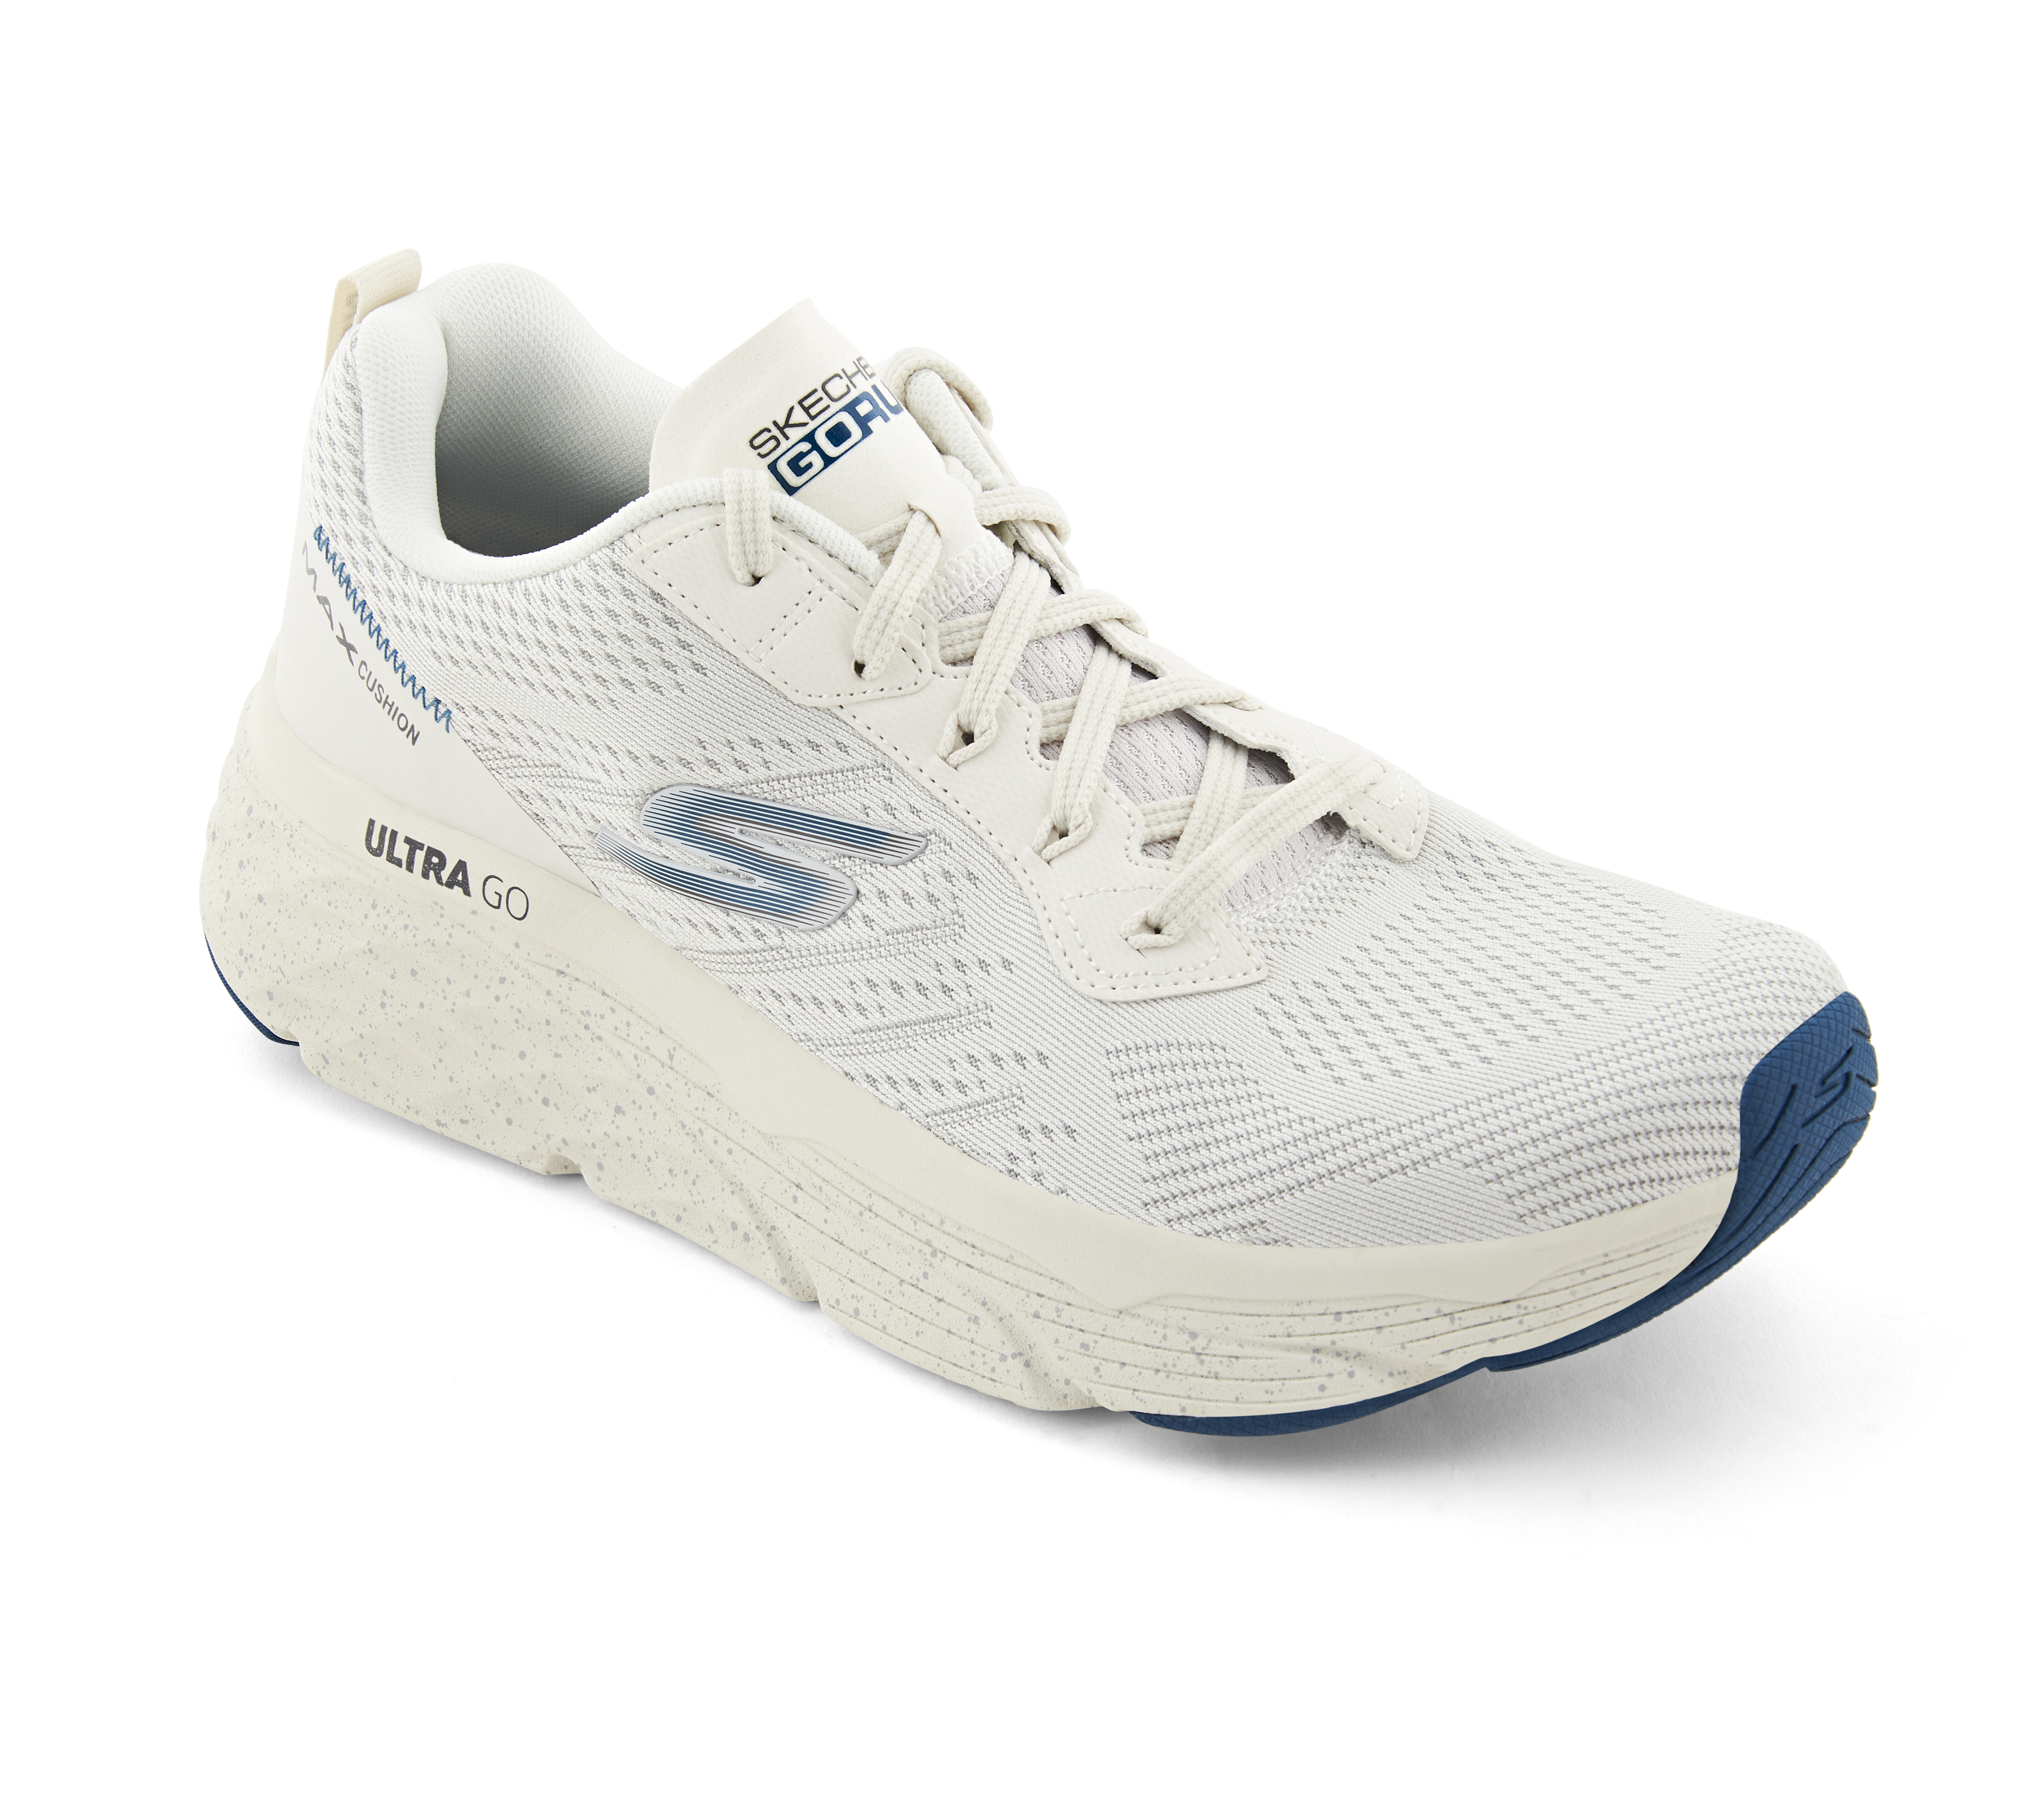 MAX CUSHIONING ELITE - LIMITL, WHITE/BLUE Footwear Lateral View